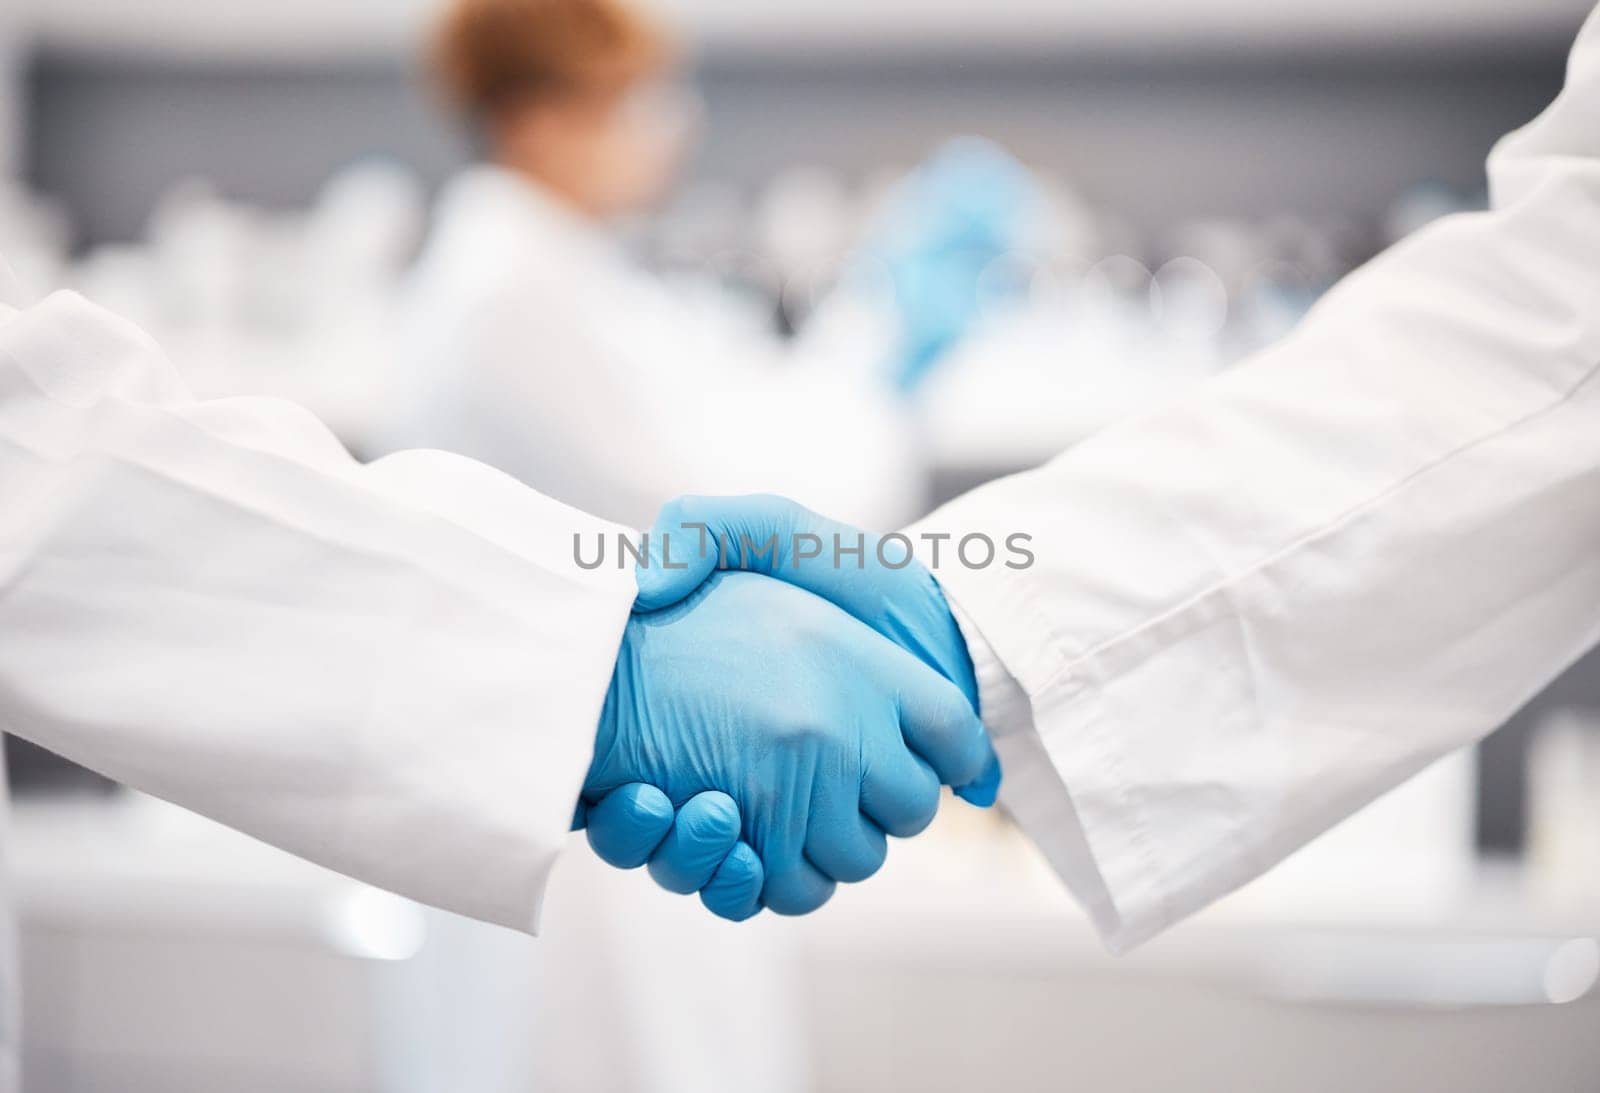 Doctor, shaking hands and gloves for safety in healthcare, partnership or trust for collaboration, unity or support at lab. Team of medical experts handshake in teamwork for agreement or success.